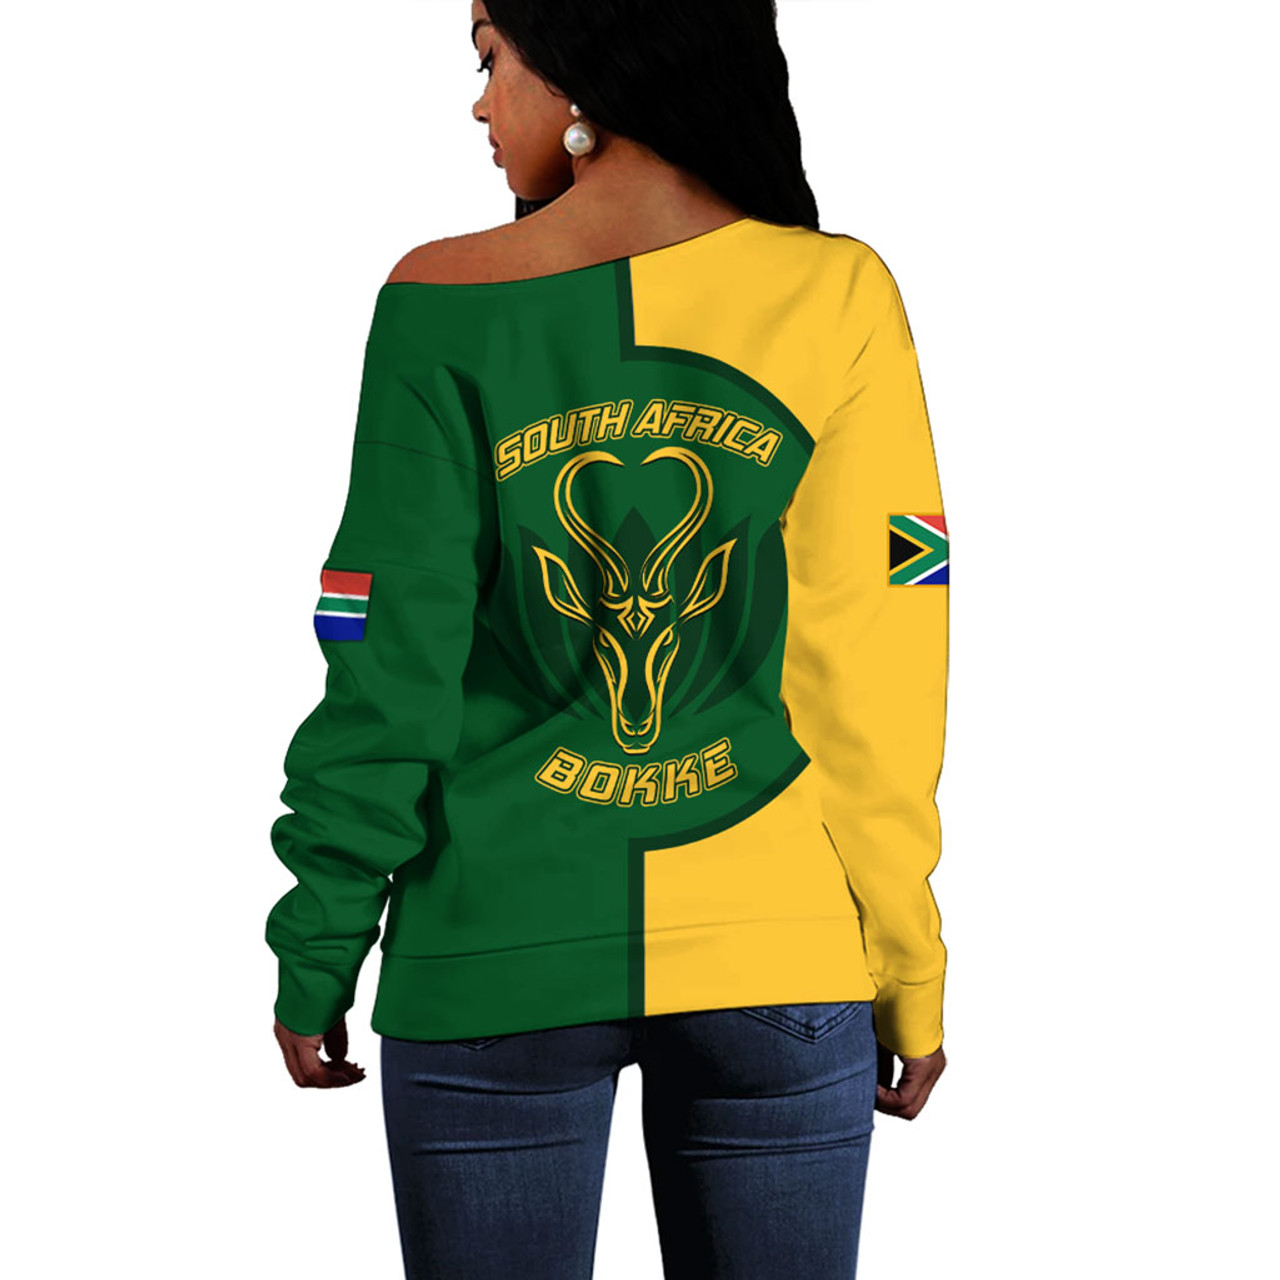 South Africa Off Shoulder Sweatshirt Circle Style